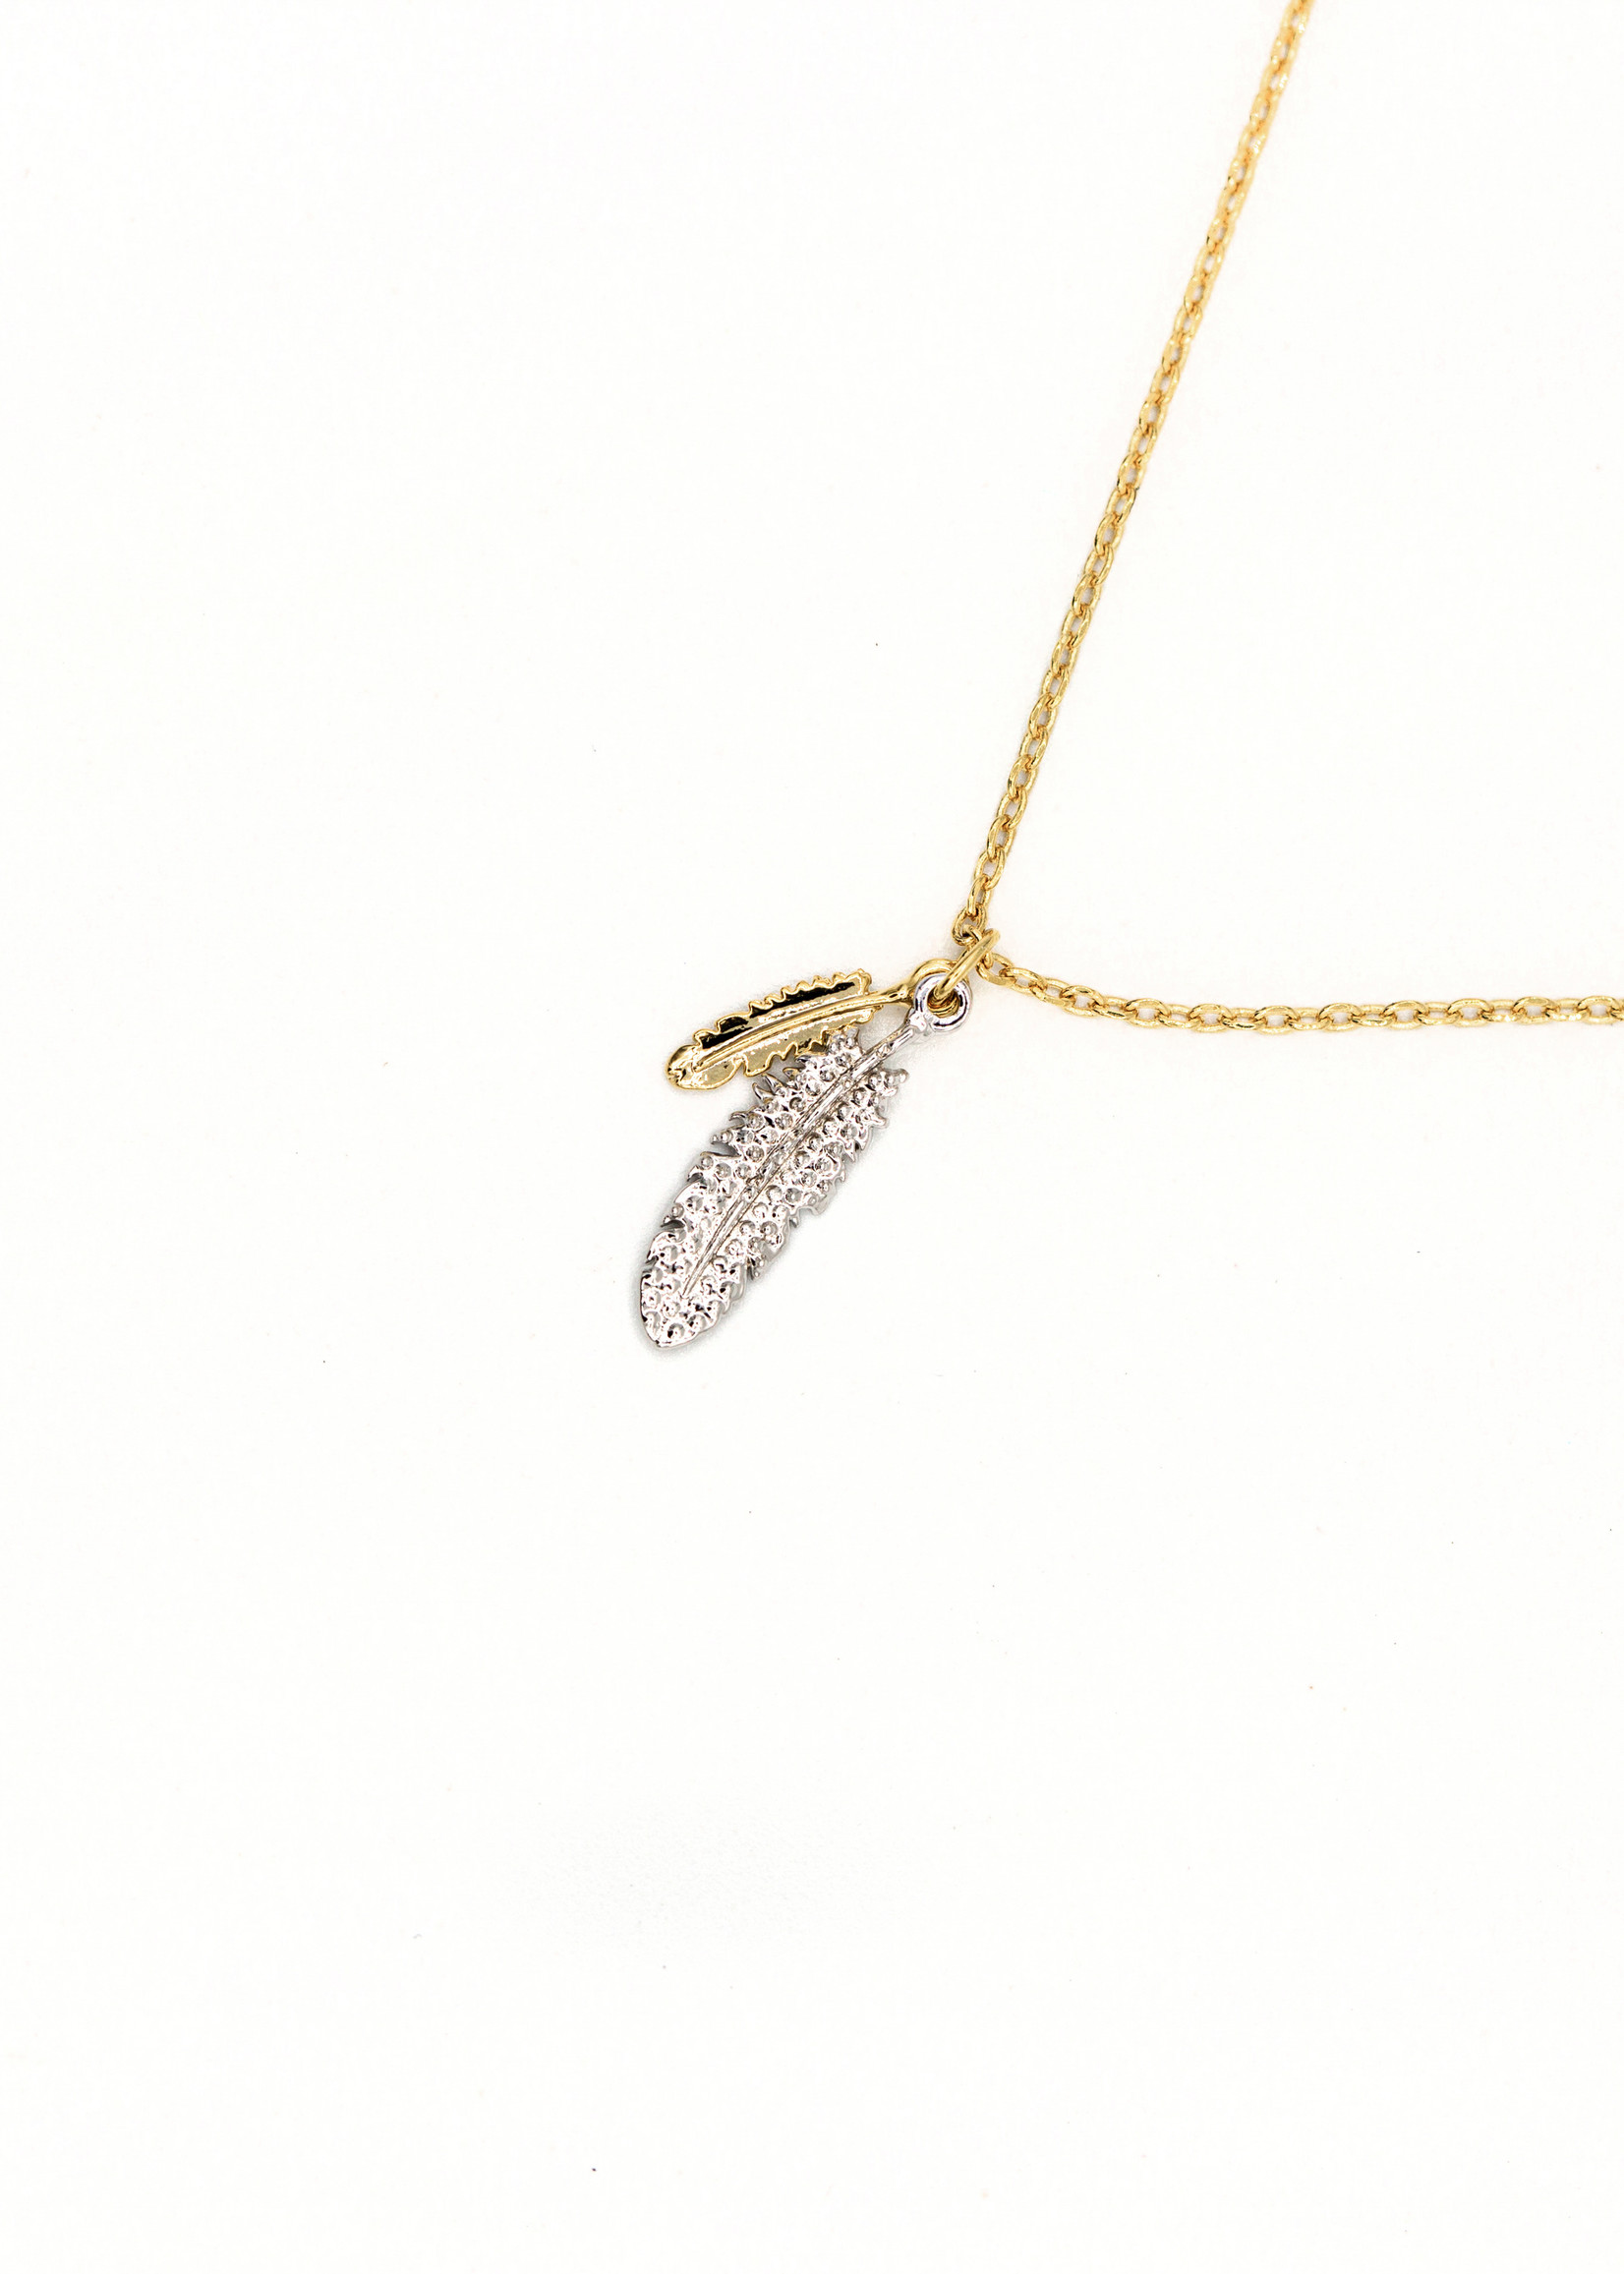 Matin Calme DT Two Feathers Pendant